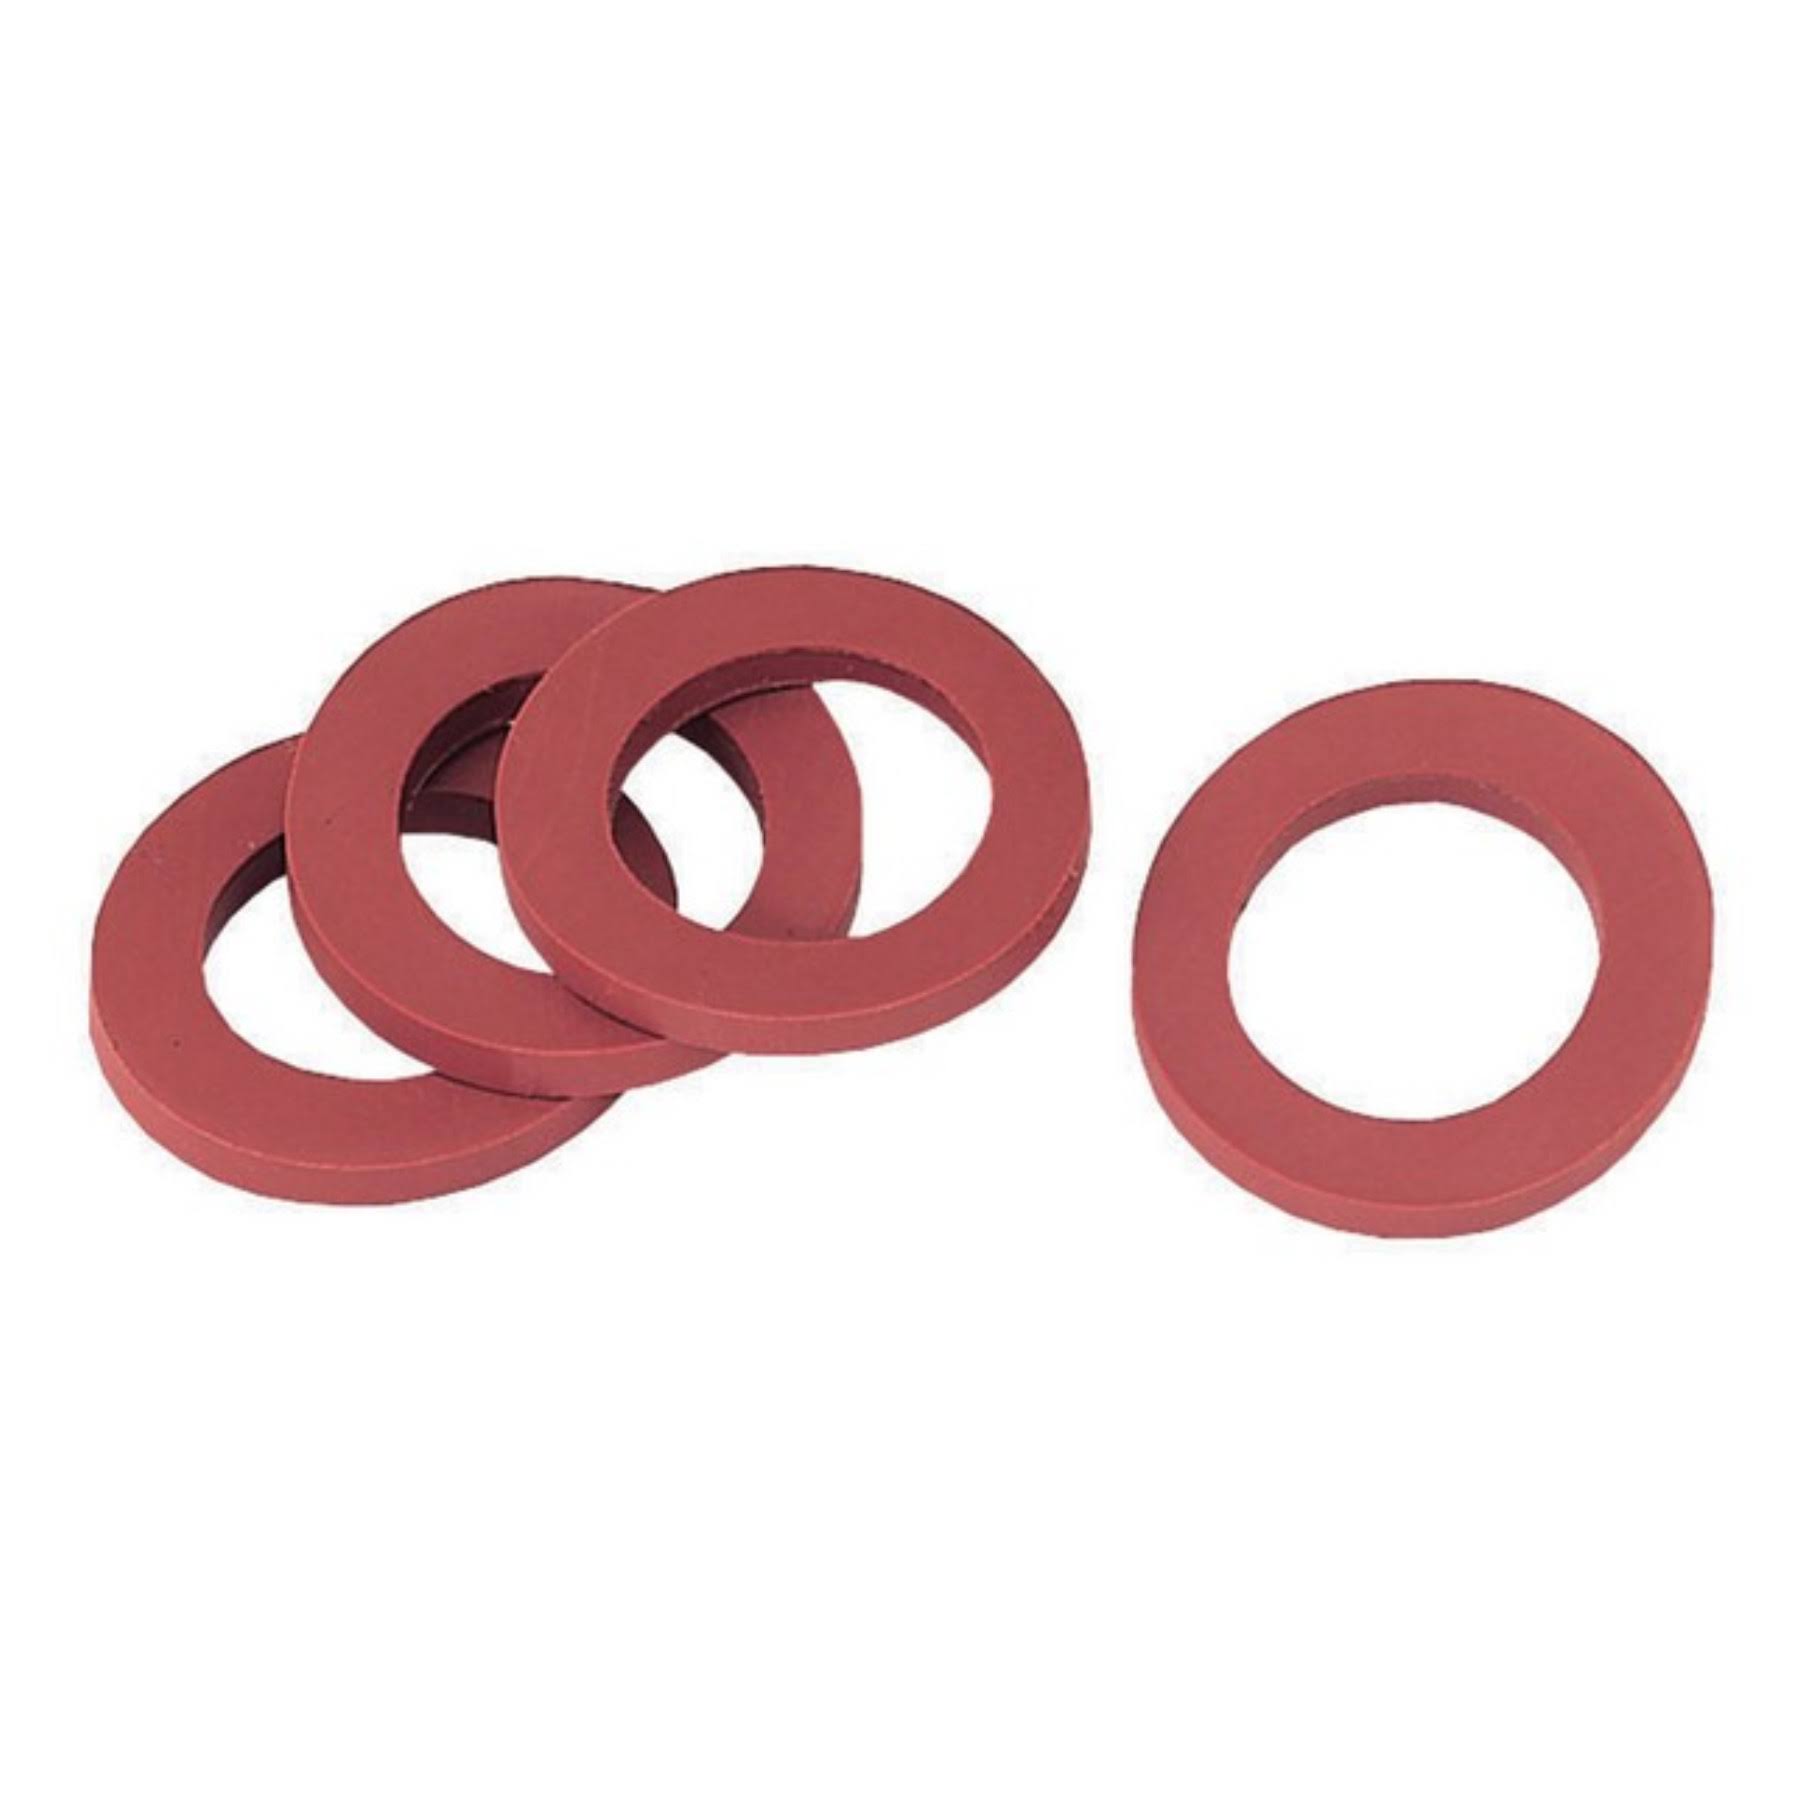 Gilmour Rubber Hose Washers - 10 ct